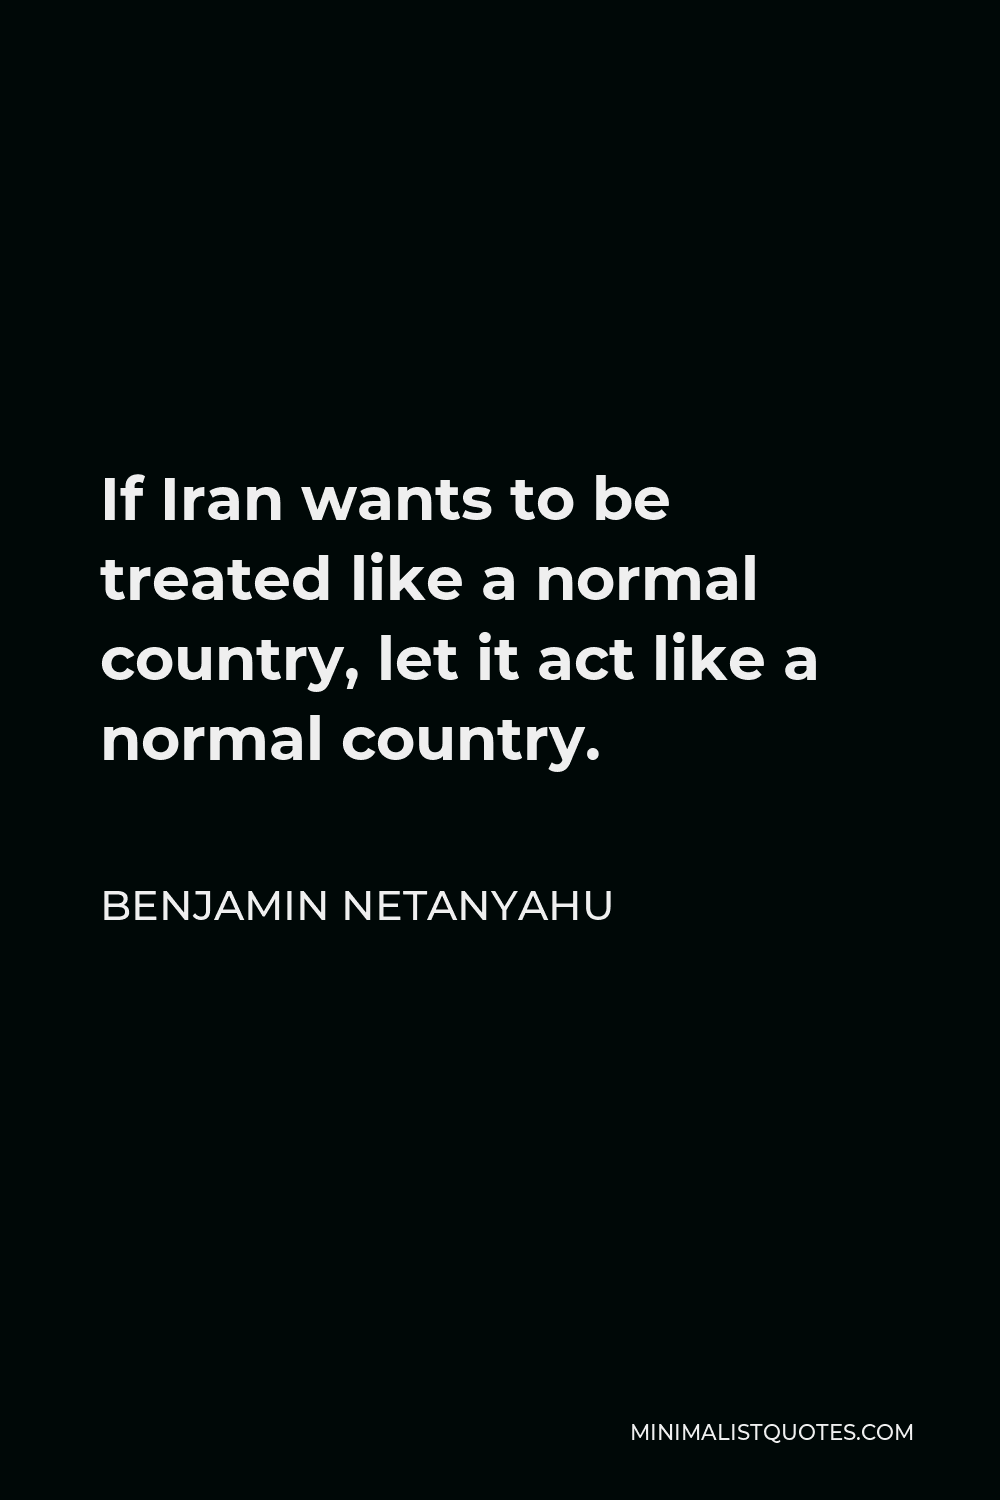 Benjamin Netanyahu Quote - If Iran wants to be treated like a normal country, let it act like a normal country.